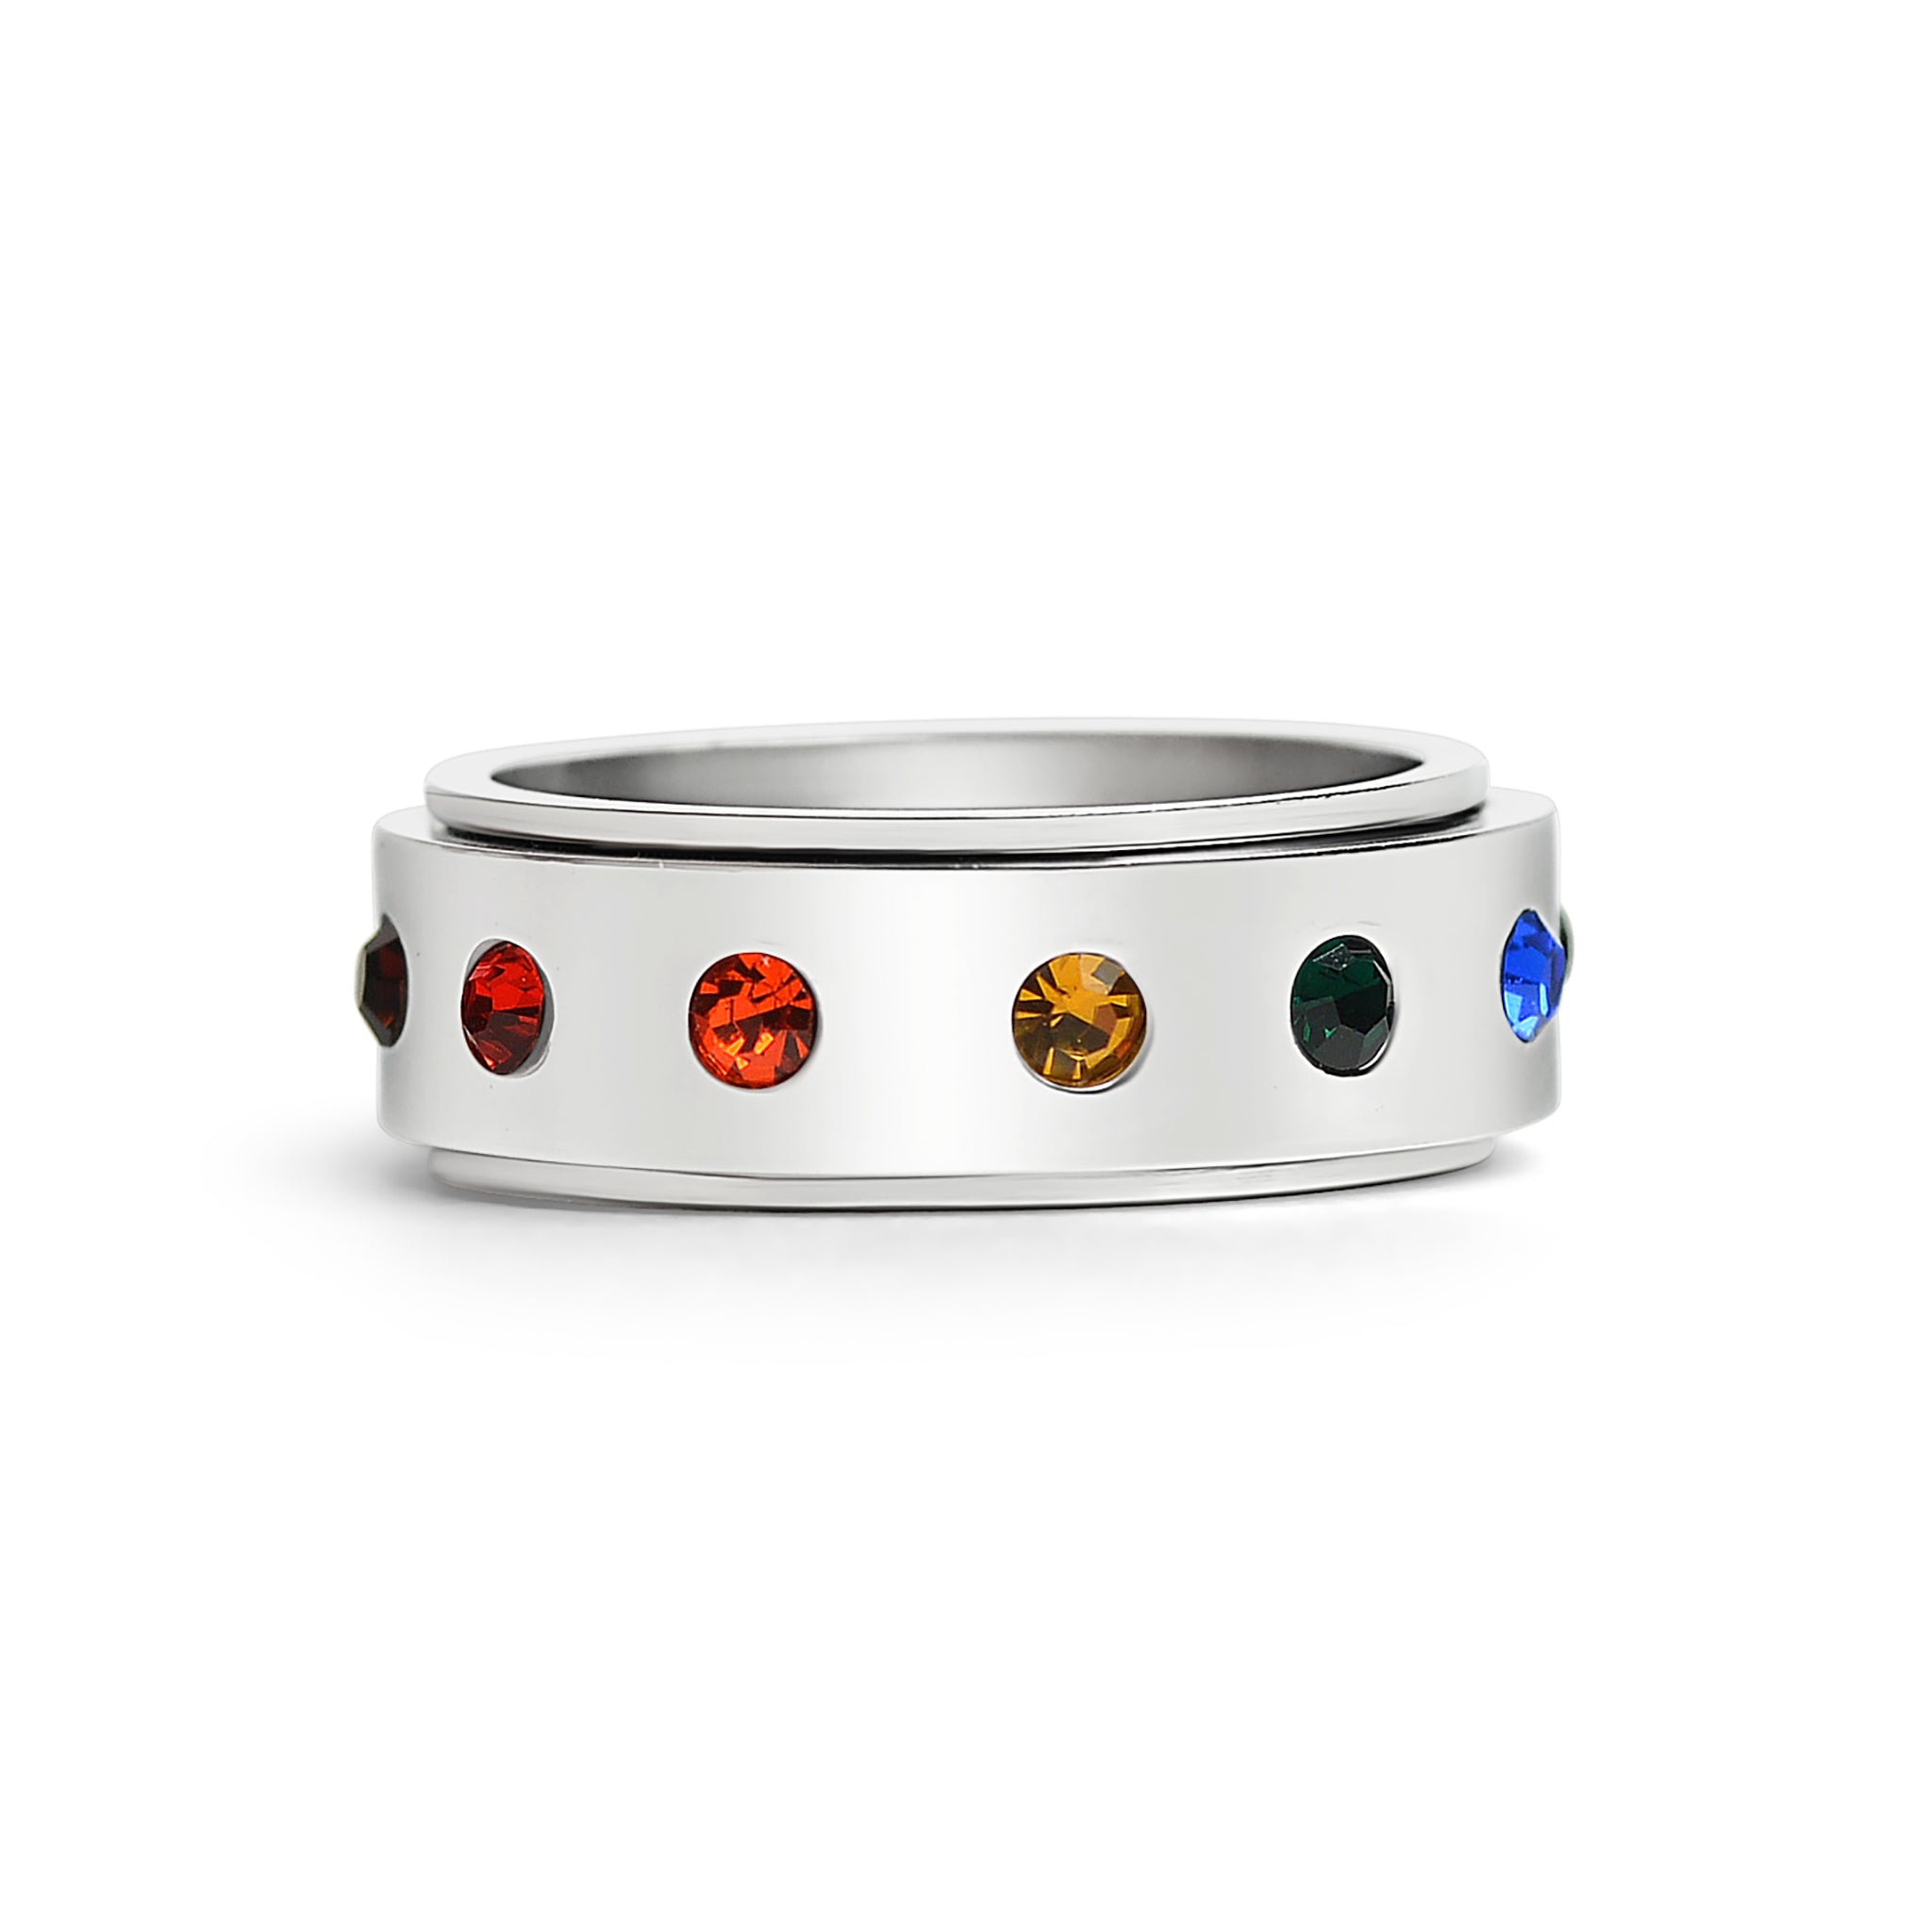 Rainbow CZ Spinner Center Highly Polished Stainless Steel Ring / SRJ0111-mens stainless steel jewelry- 316l stainless steel jewelry- stainless steel mens jewelry- jewelry stainless steel- stainless steel jewelry made in china